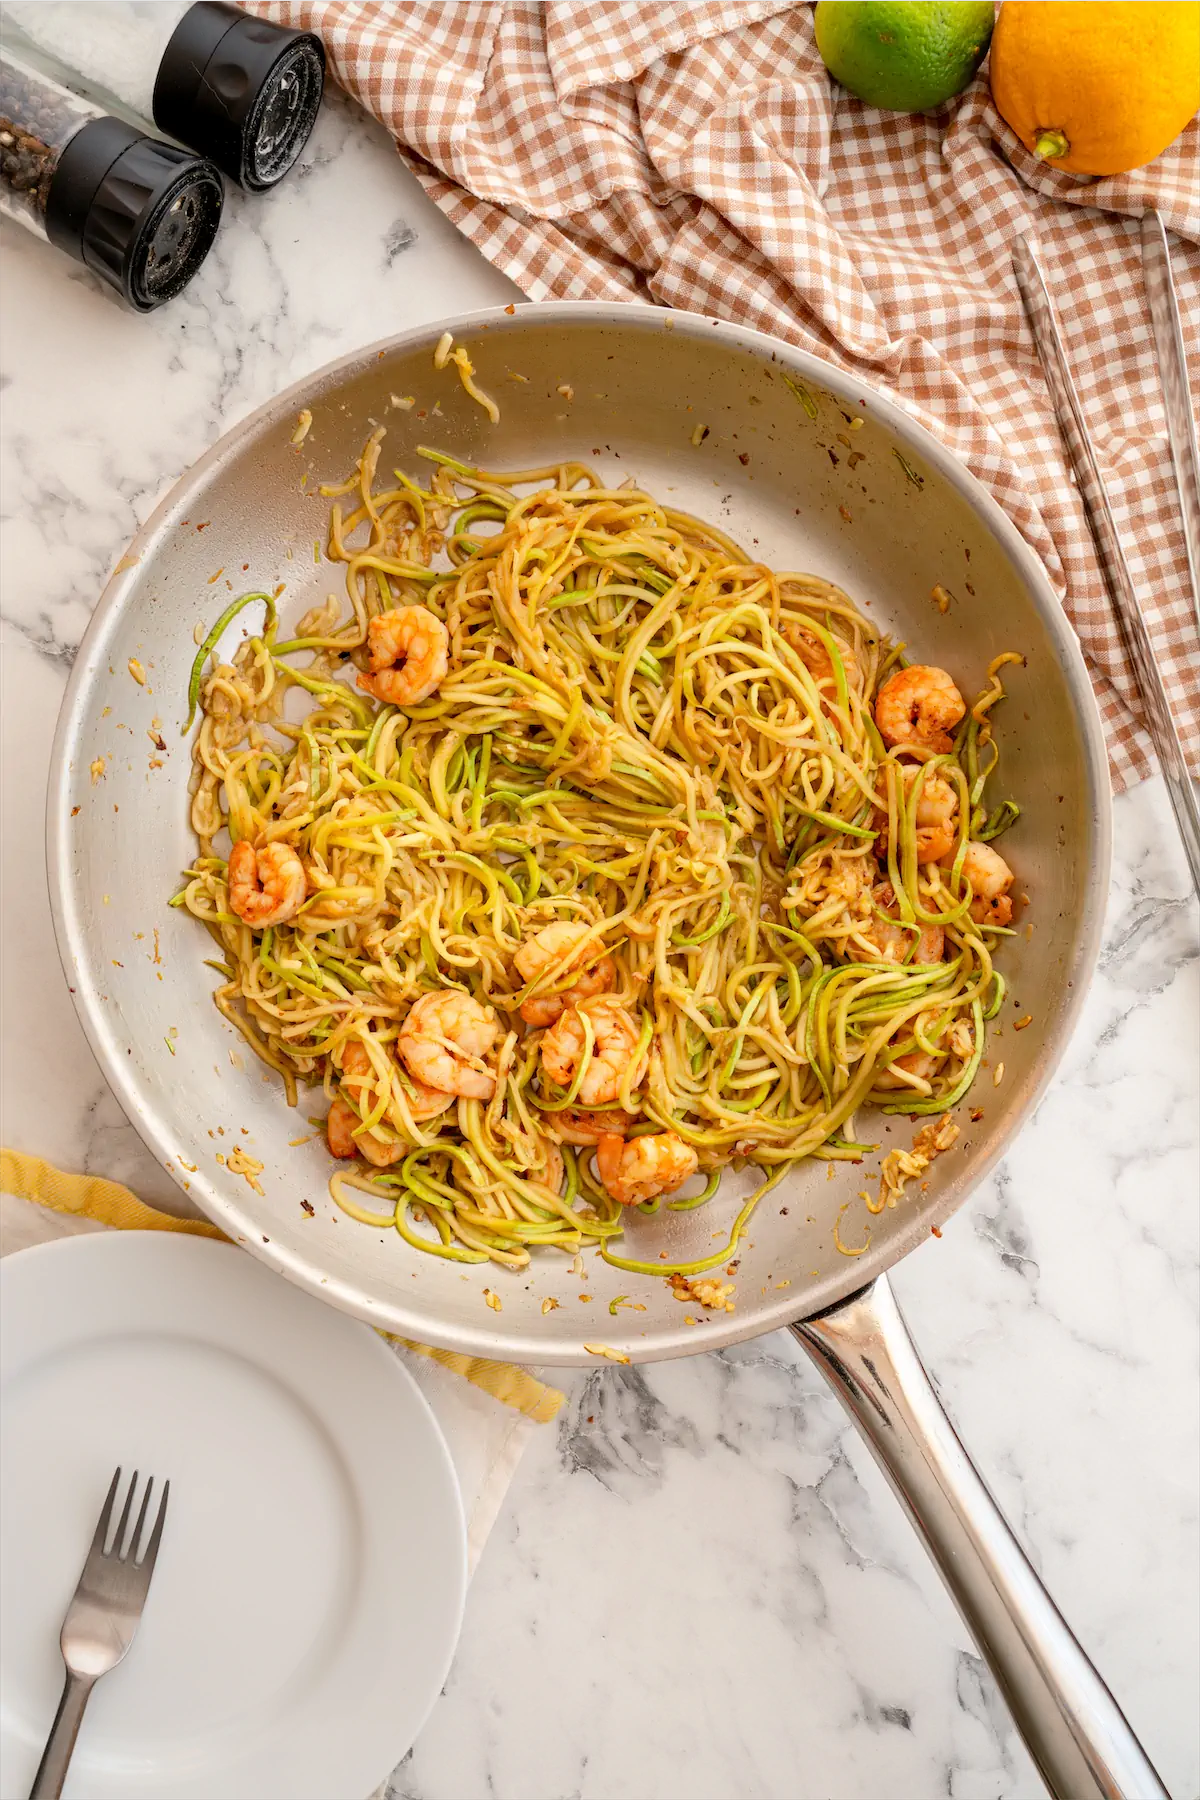 Zucchini noodles and shrimp in a steel skillet on the table beside a fork and a plate ready to be served.